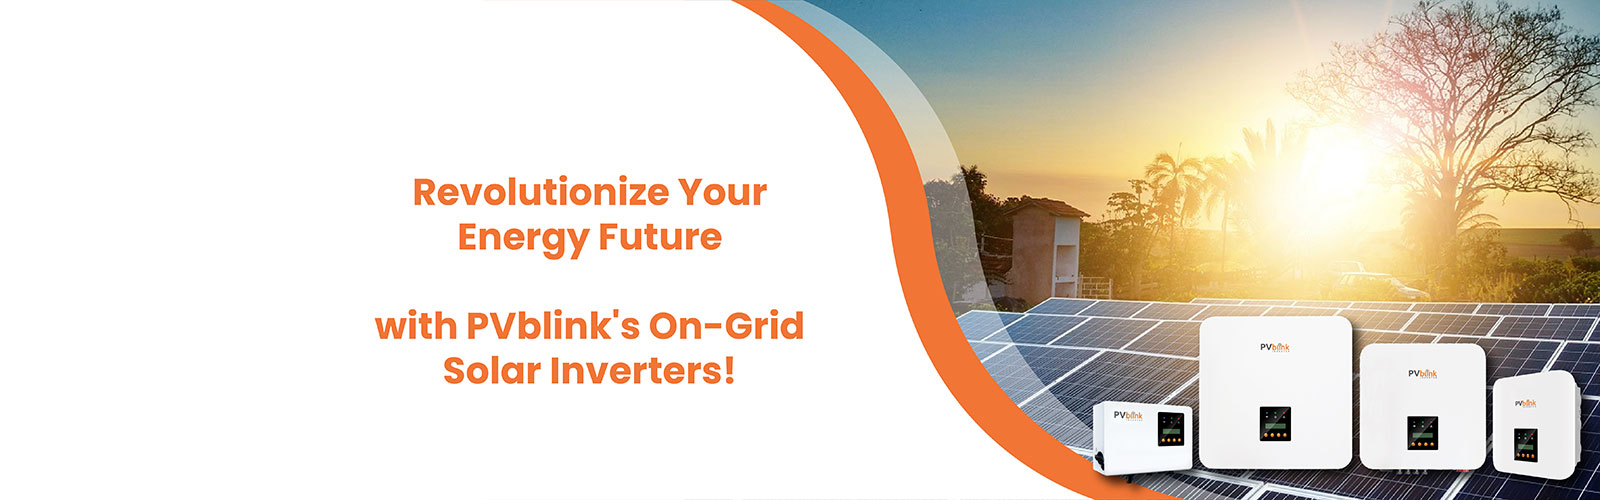 Revolutionize Your Energy Future with PVblink's On-Grid Solar Inverters!